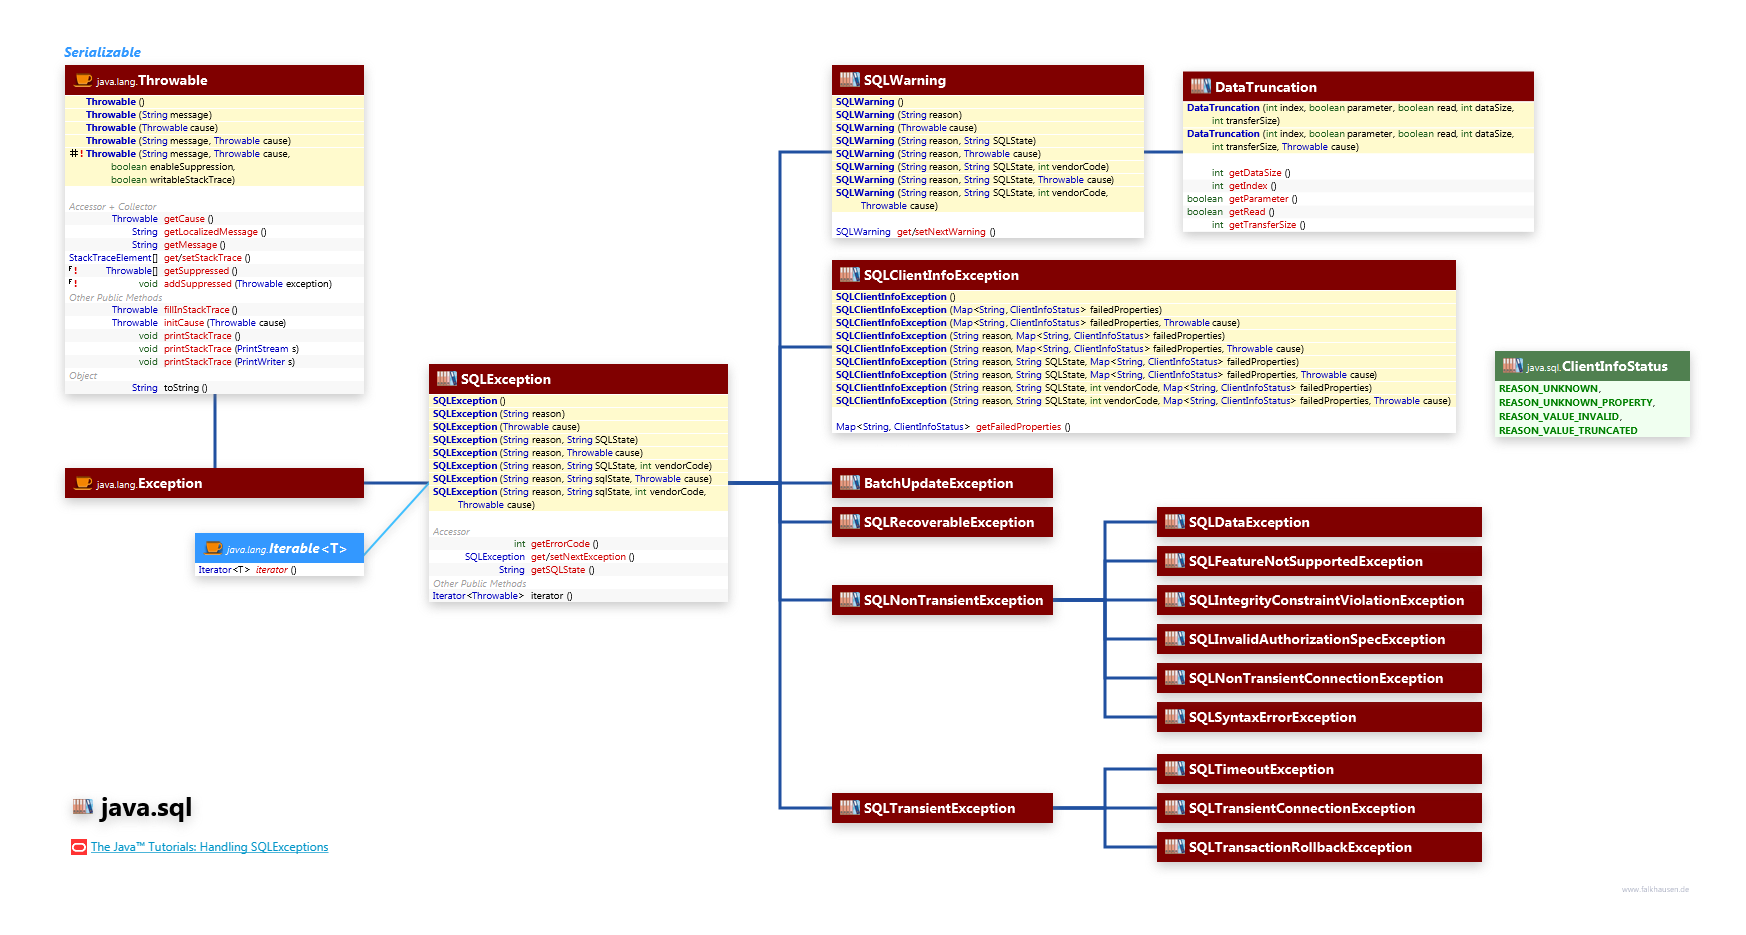 java.sql Exceptions class diagram and api documentation for Java 7